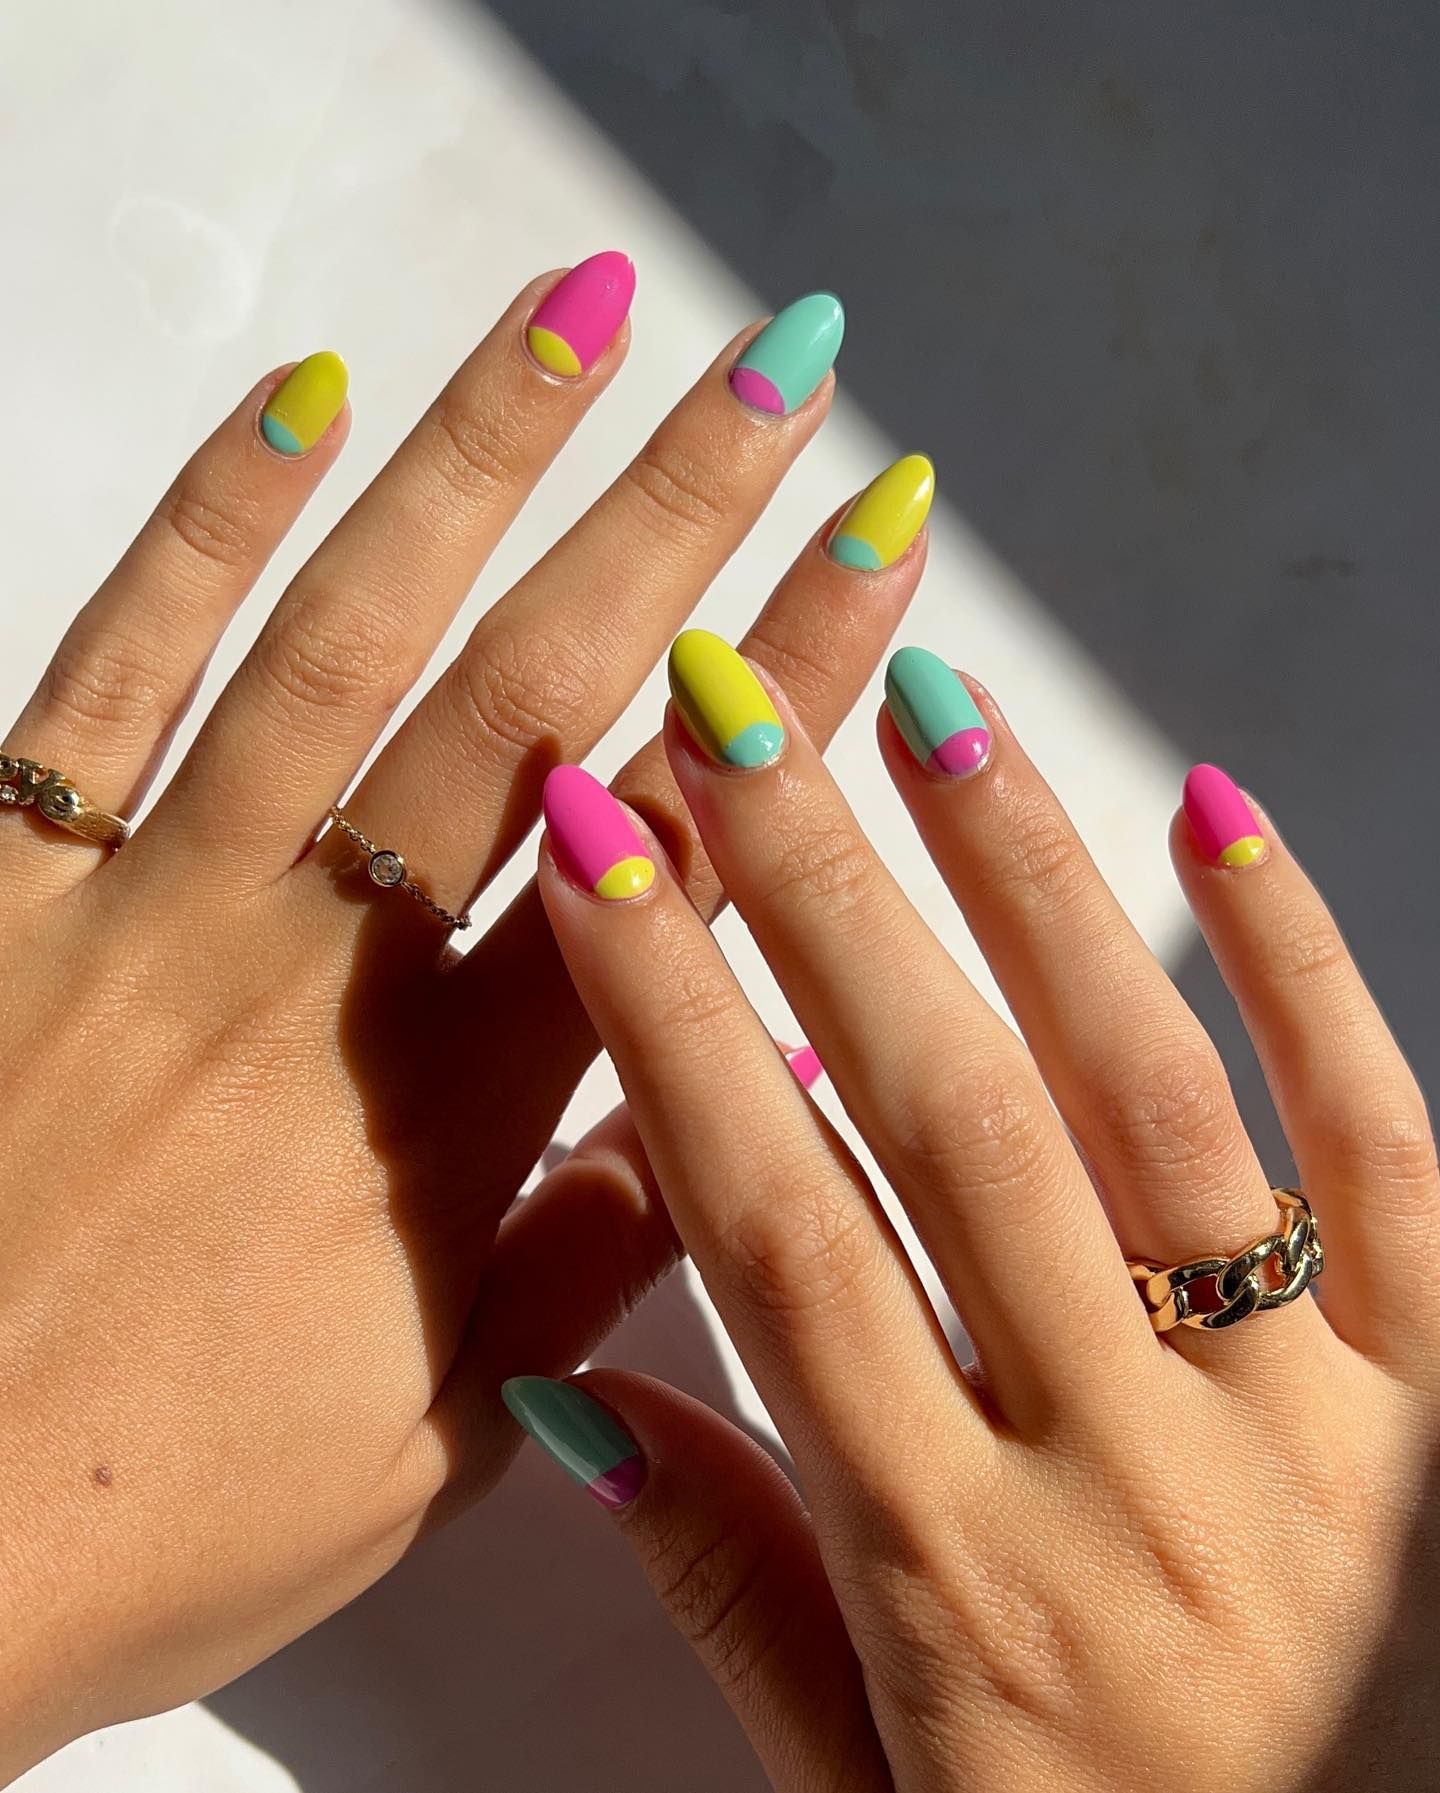 Acrylic nails summer 2020: Butterfly nail art is the trend of the year